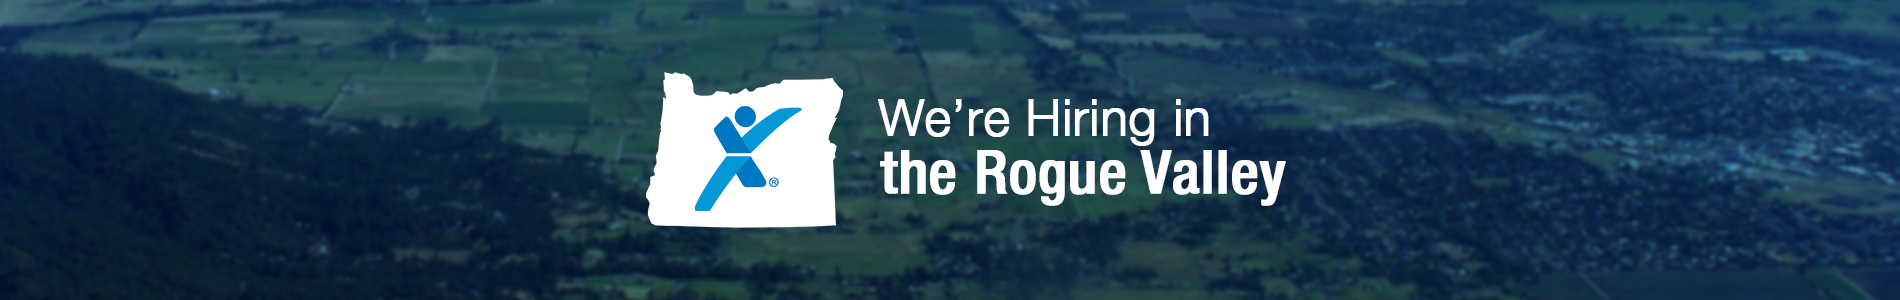 Now Hiring in the Rogue Valley!